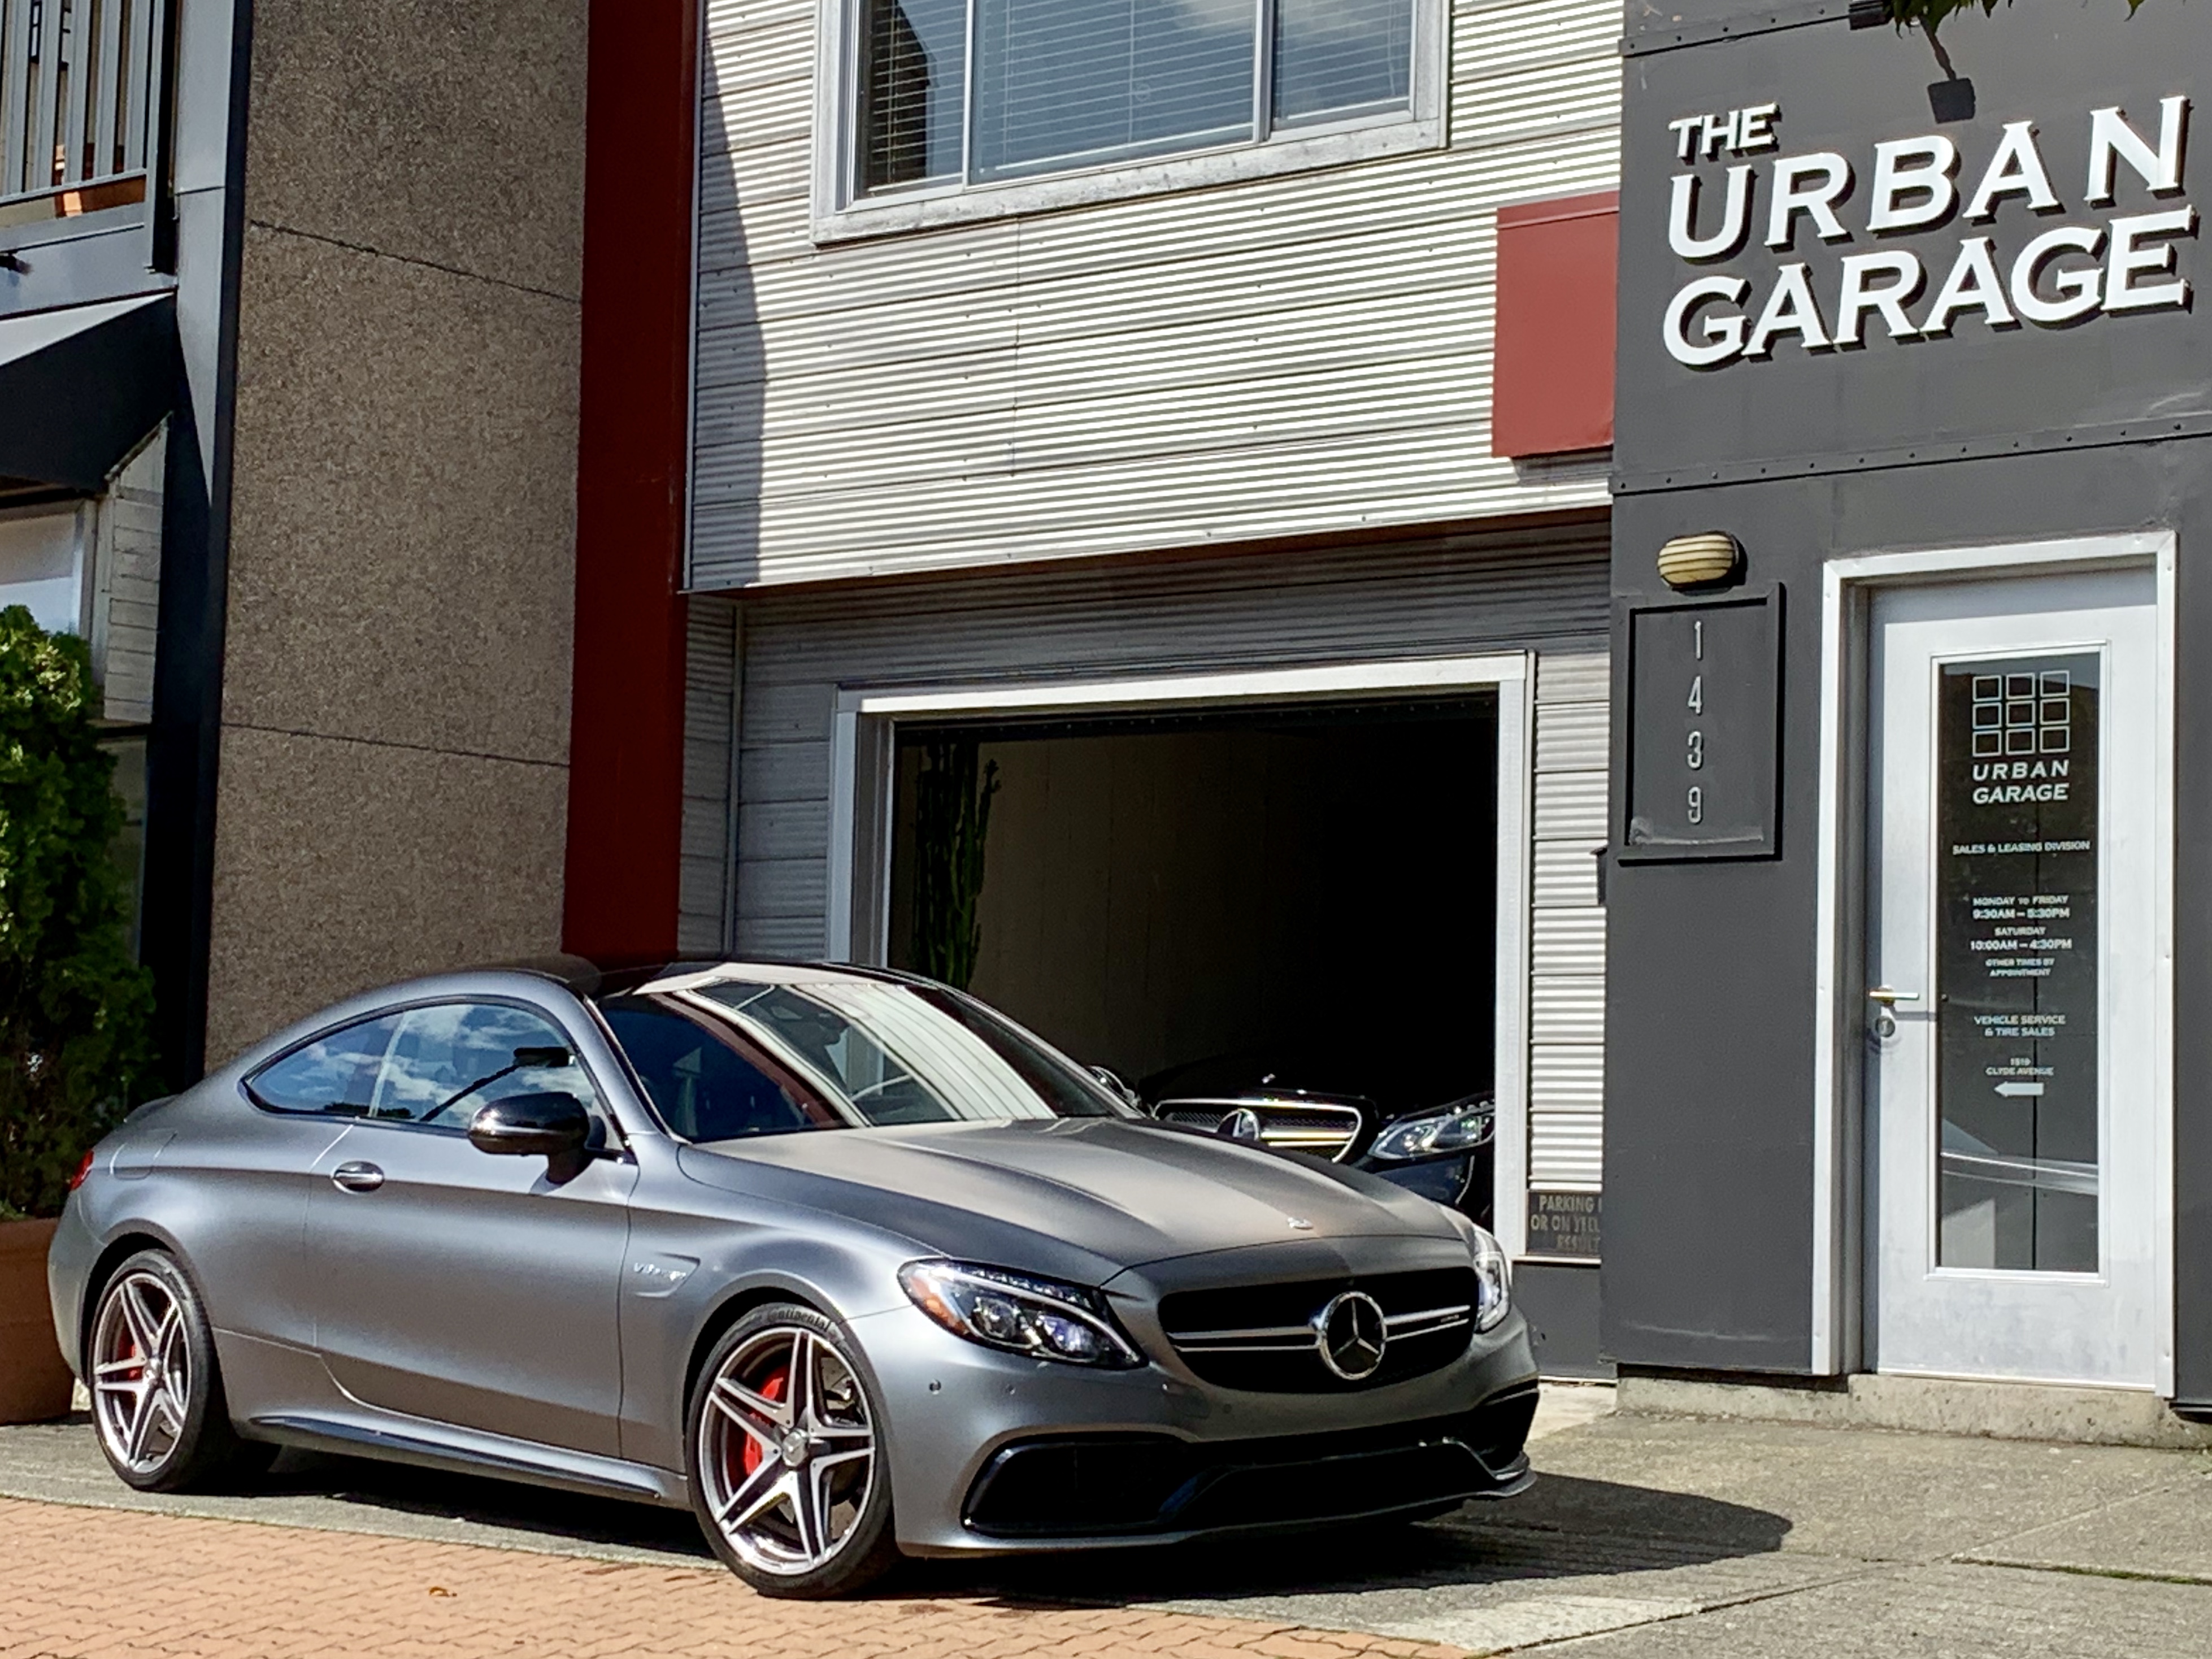 Used Mercedes-Benz For Sale - CarGurus